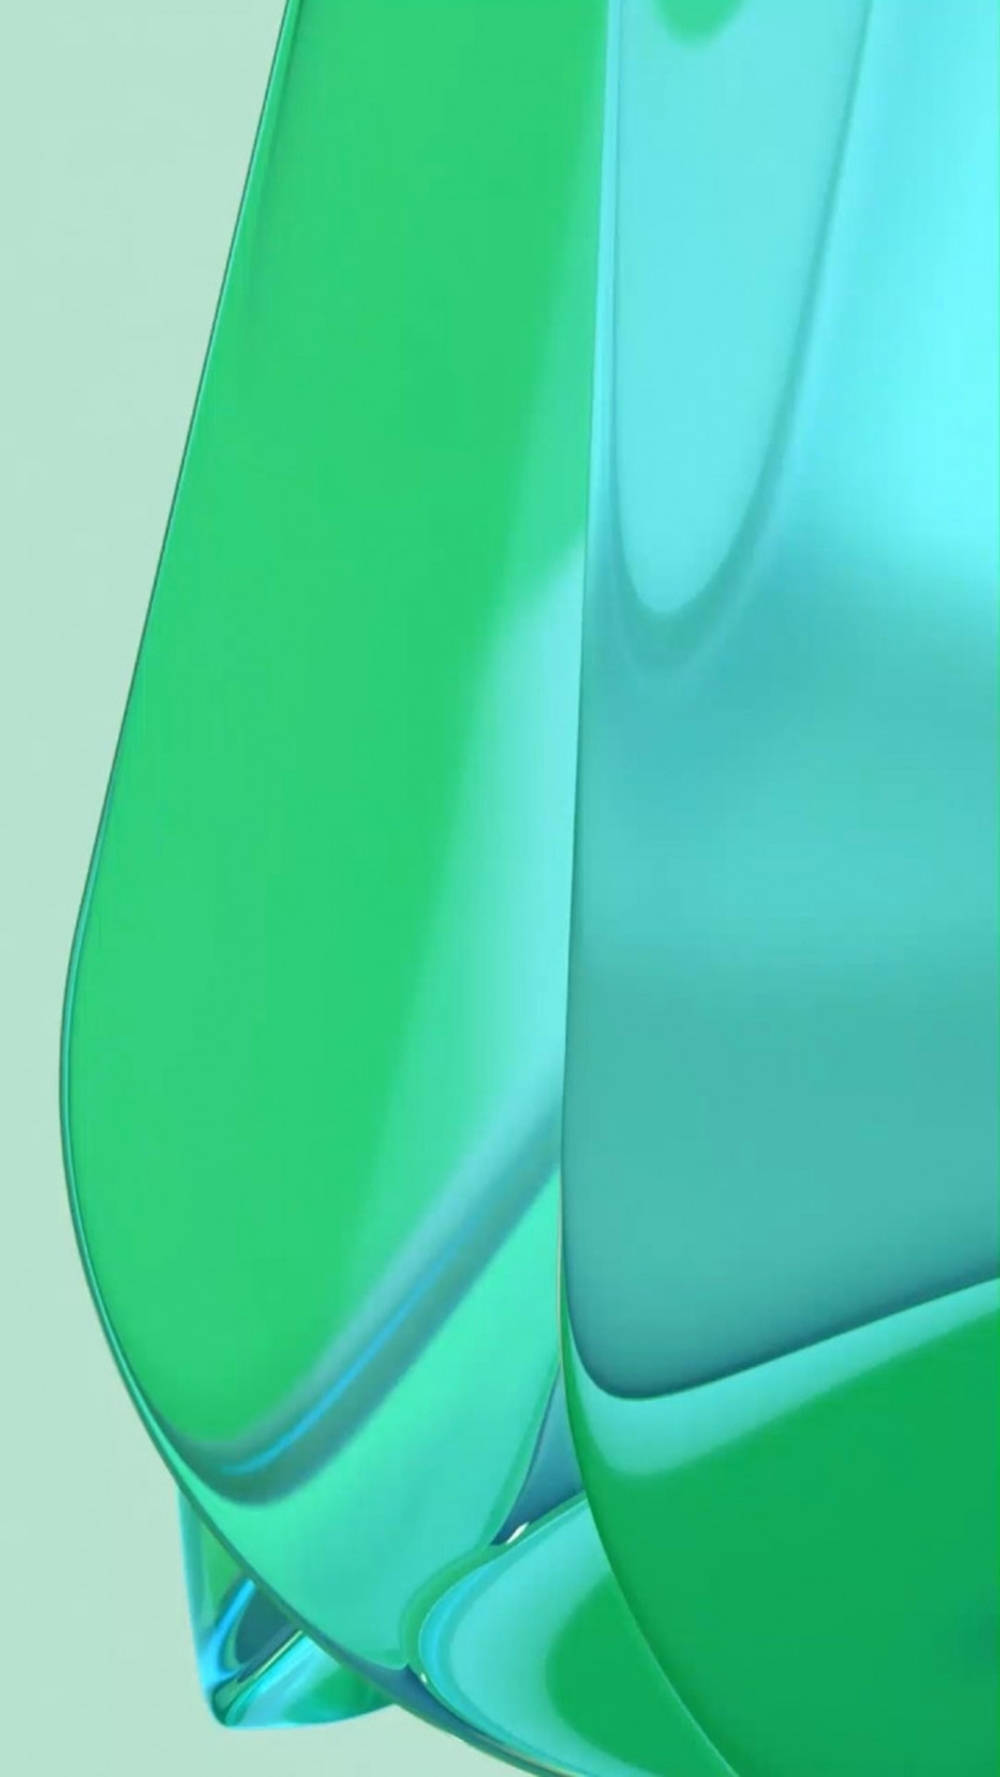 Oneplus 9 Pro In Stunning Green Jelly Color Background